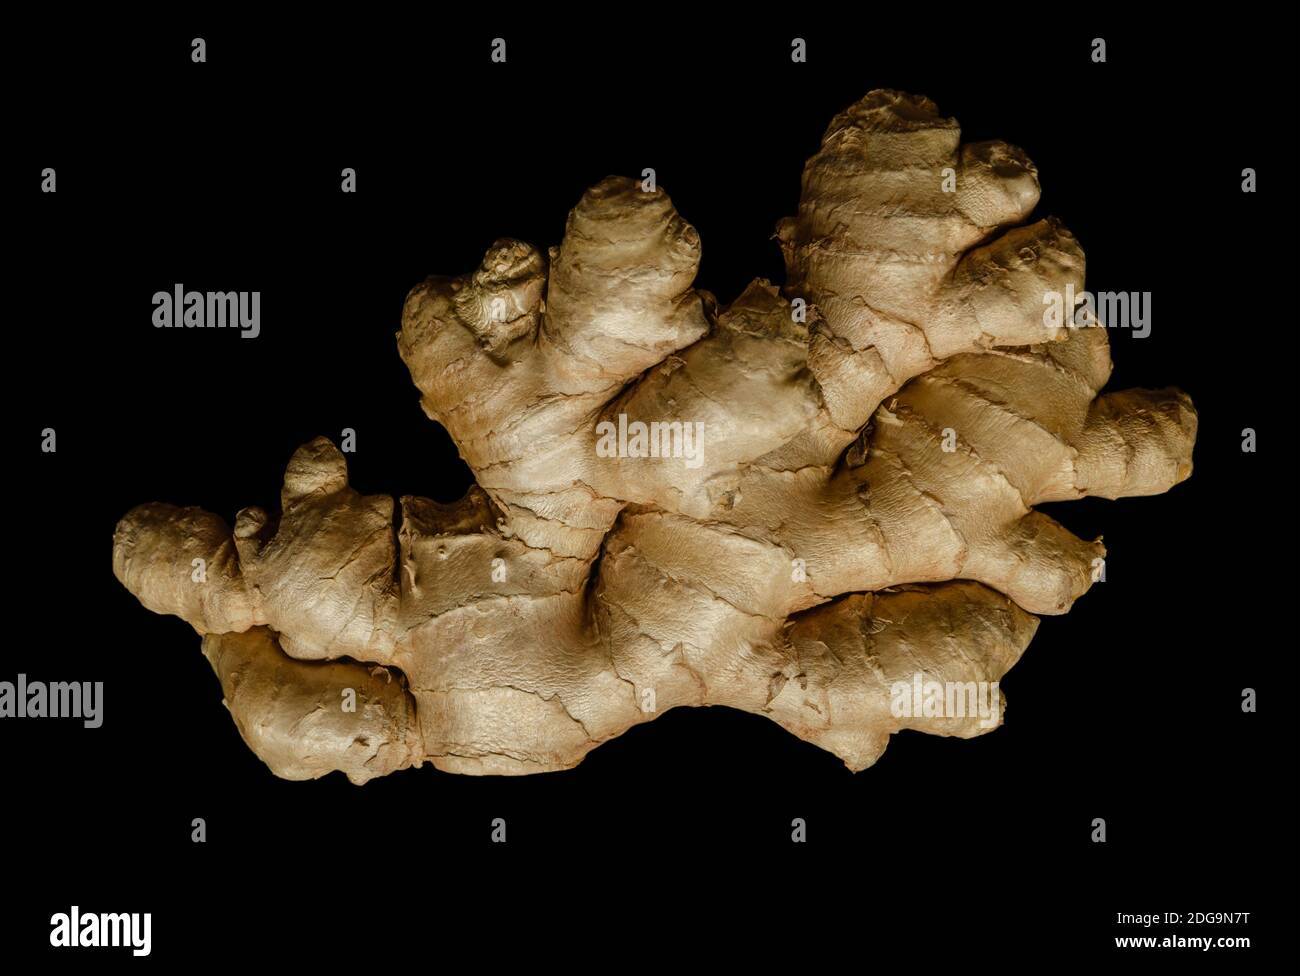 Fresh ginger root, from above on black background. Juicy and fleshy rhizome of Zingiber officinale. Used as a fragrant kitchen spice. Stock Photo